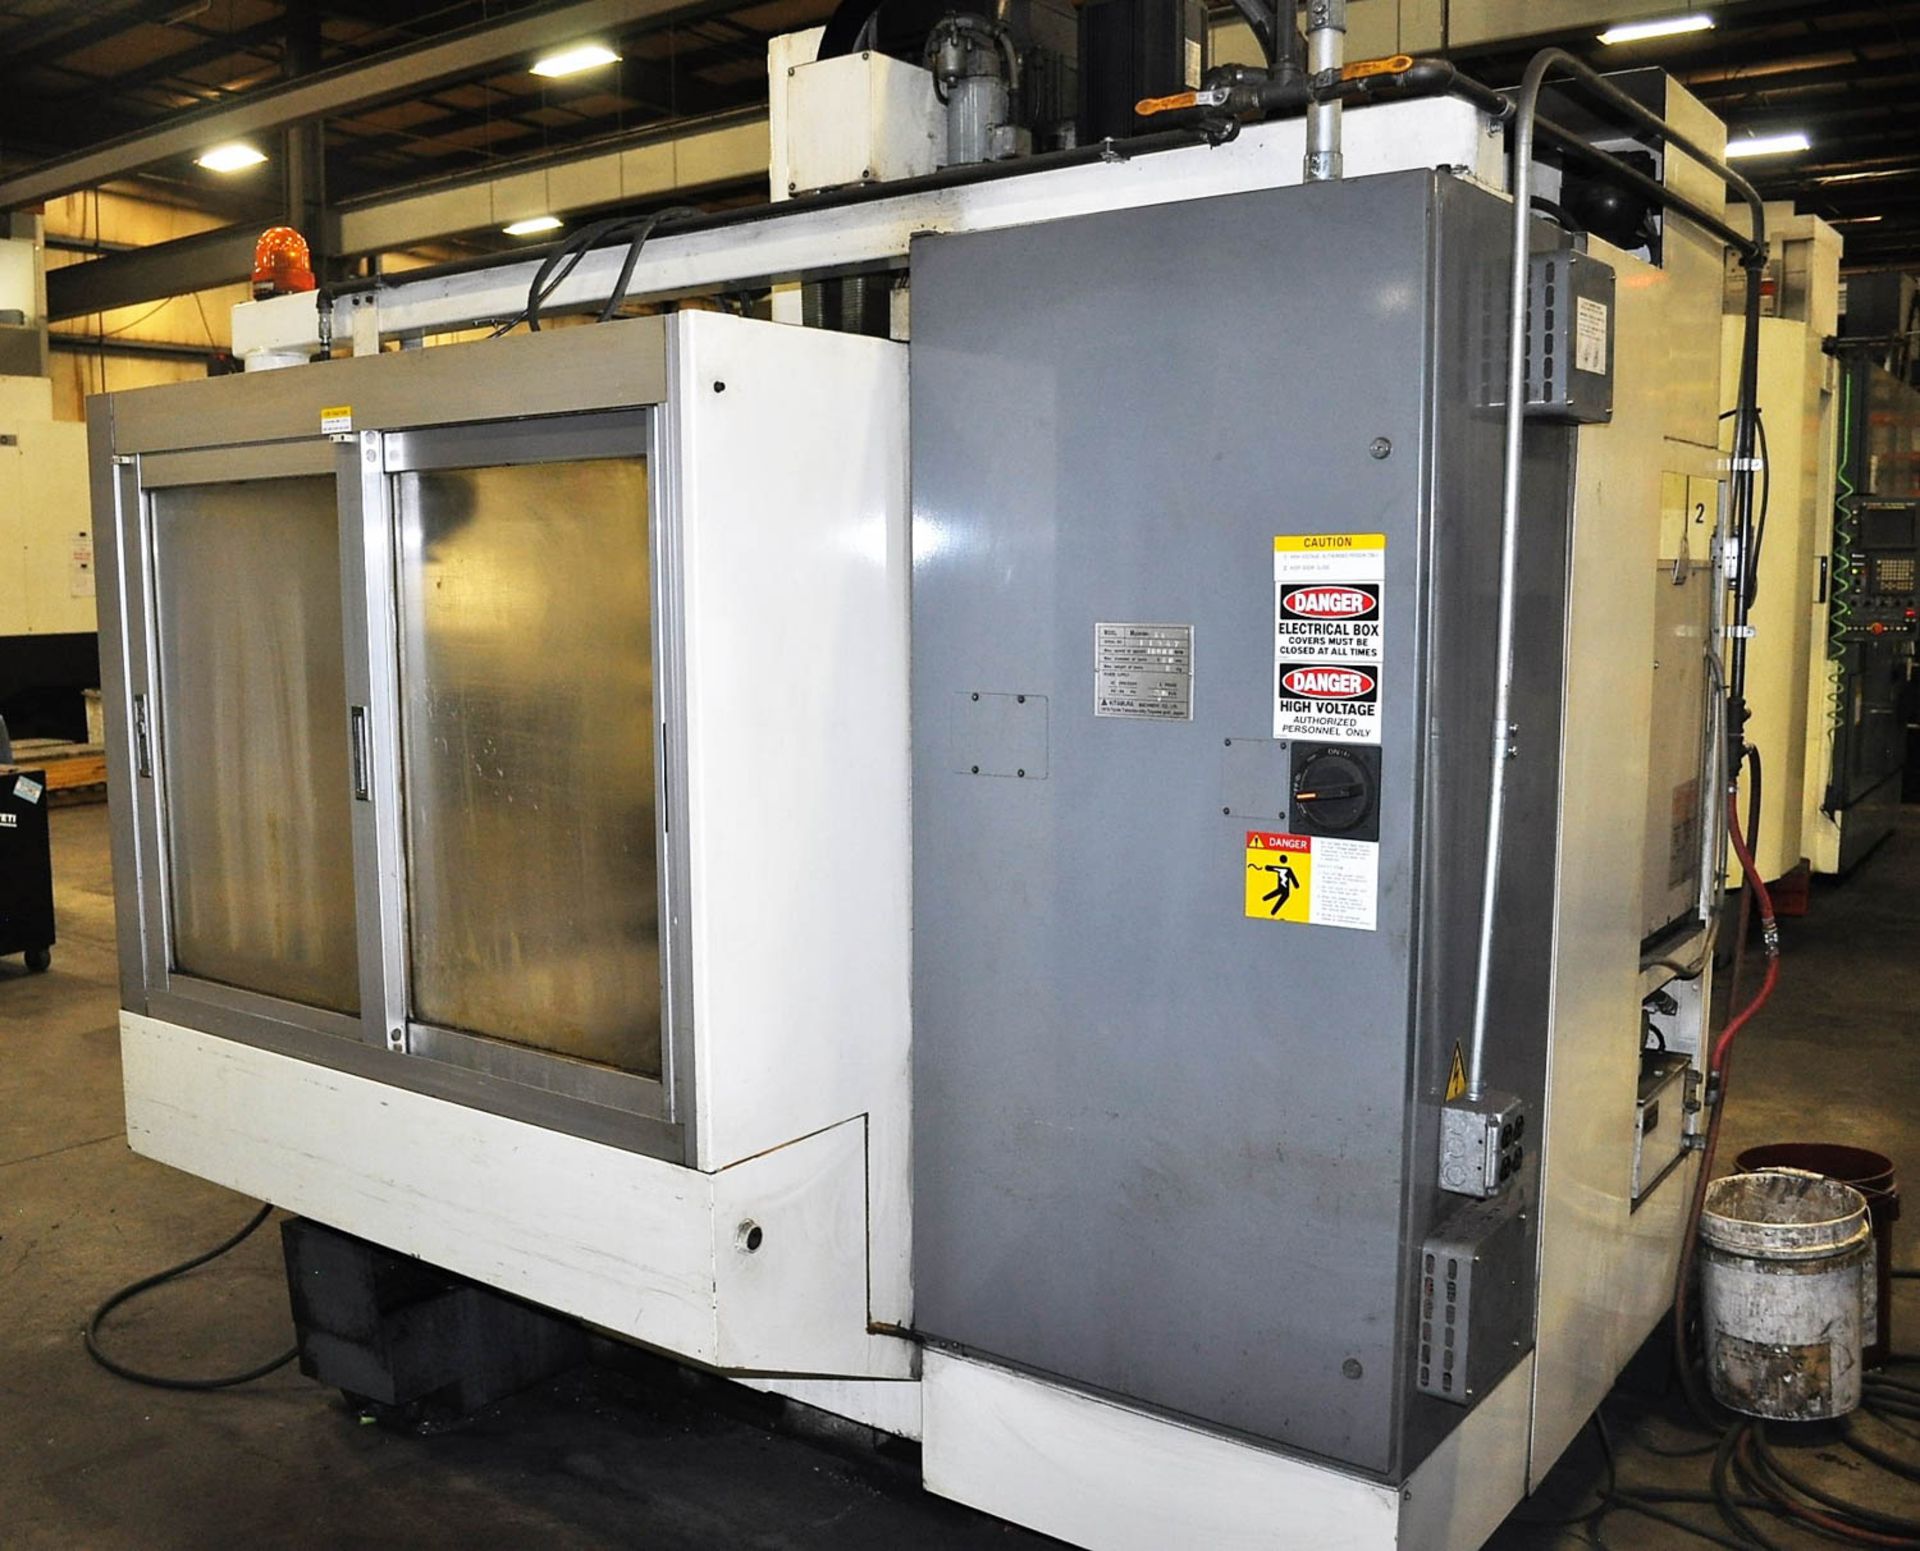 KITAMURA MYCENTER MDL. 3X CNC VERTICAL MACHINING CENTER, WITH 10,000 RPM, 20-POSITION AUTOMATIC TOOL - Image 7 of 8